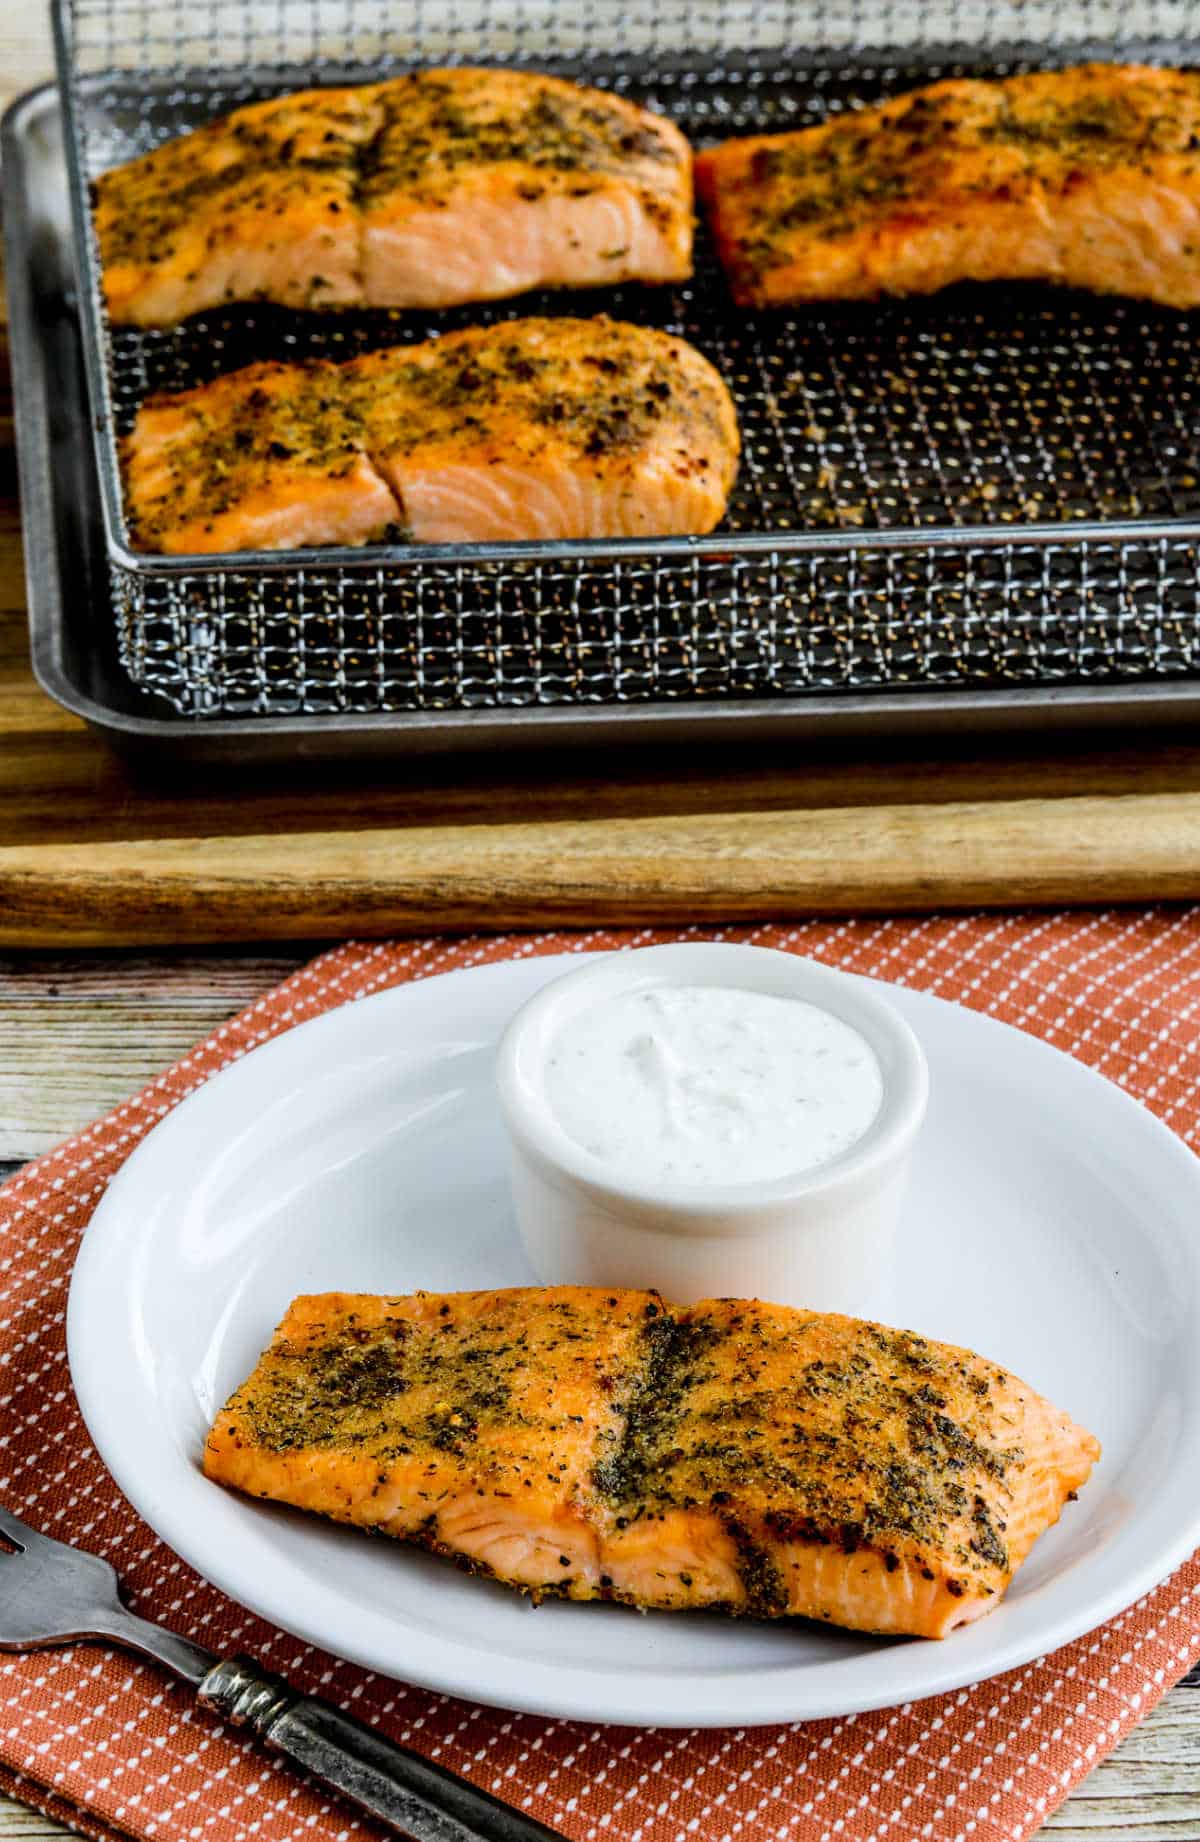 Greek Salmon cooked in air fryer, shown on serving plate with Tzatziki